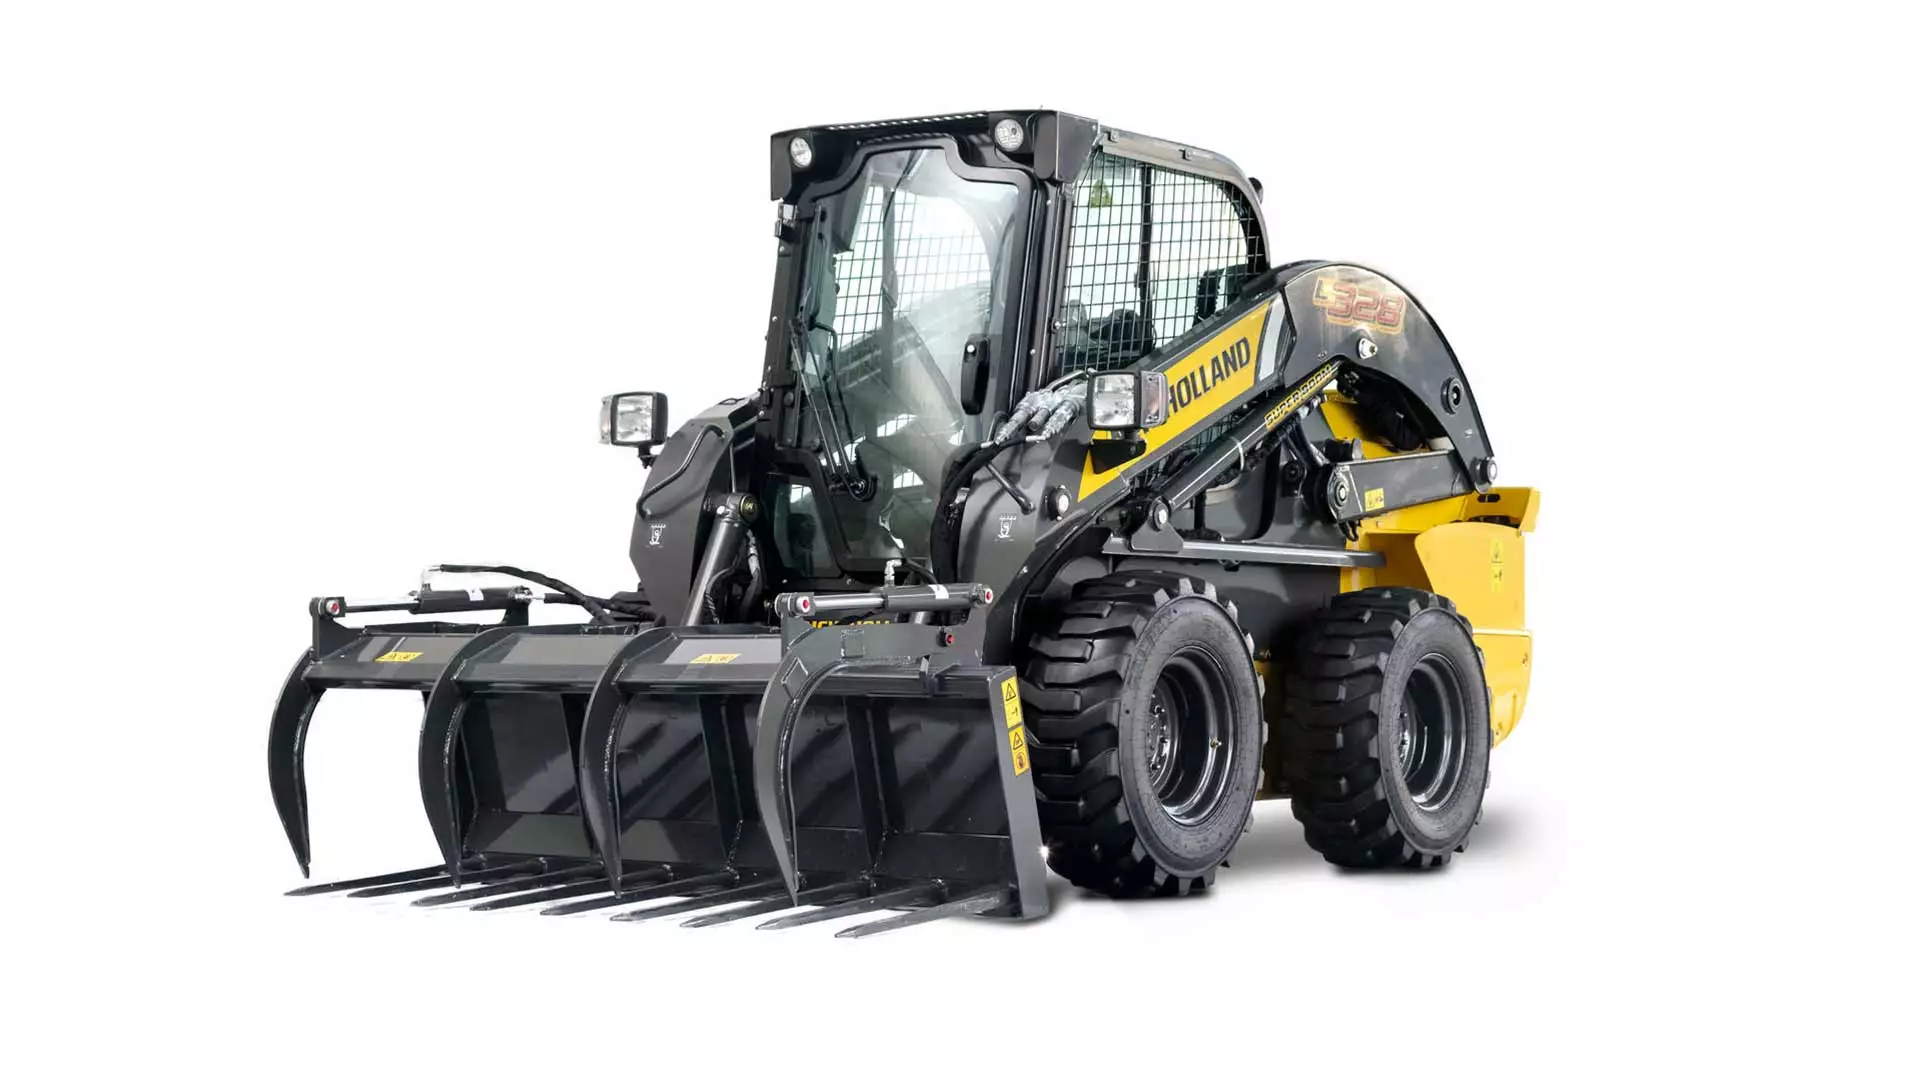 New Holland Skid Steer Loader, detailed view, with advanced grapple attachment, construction equipment.